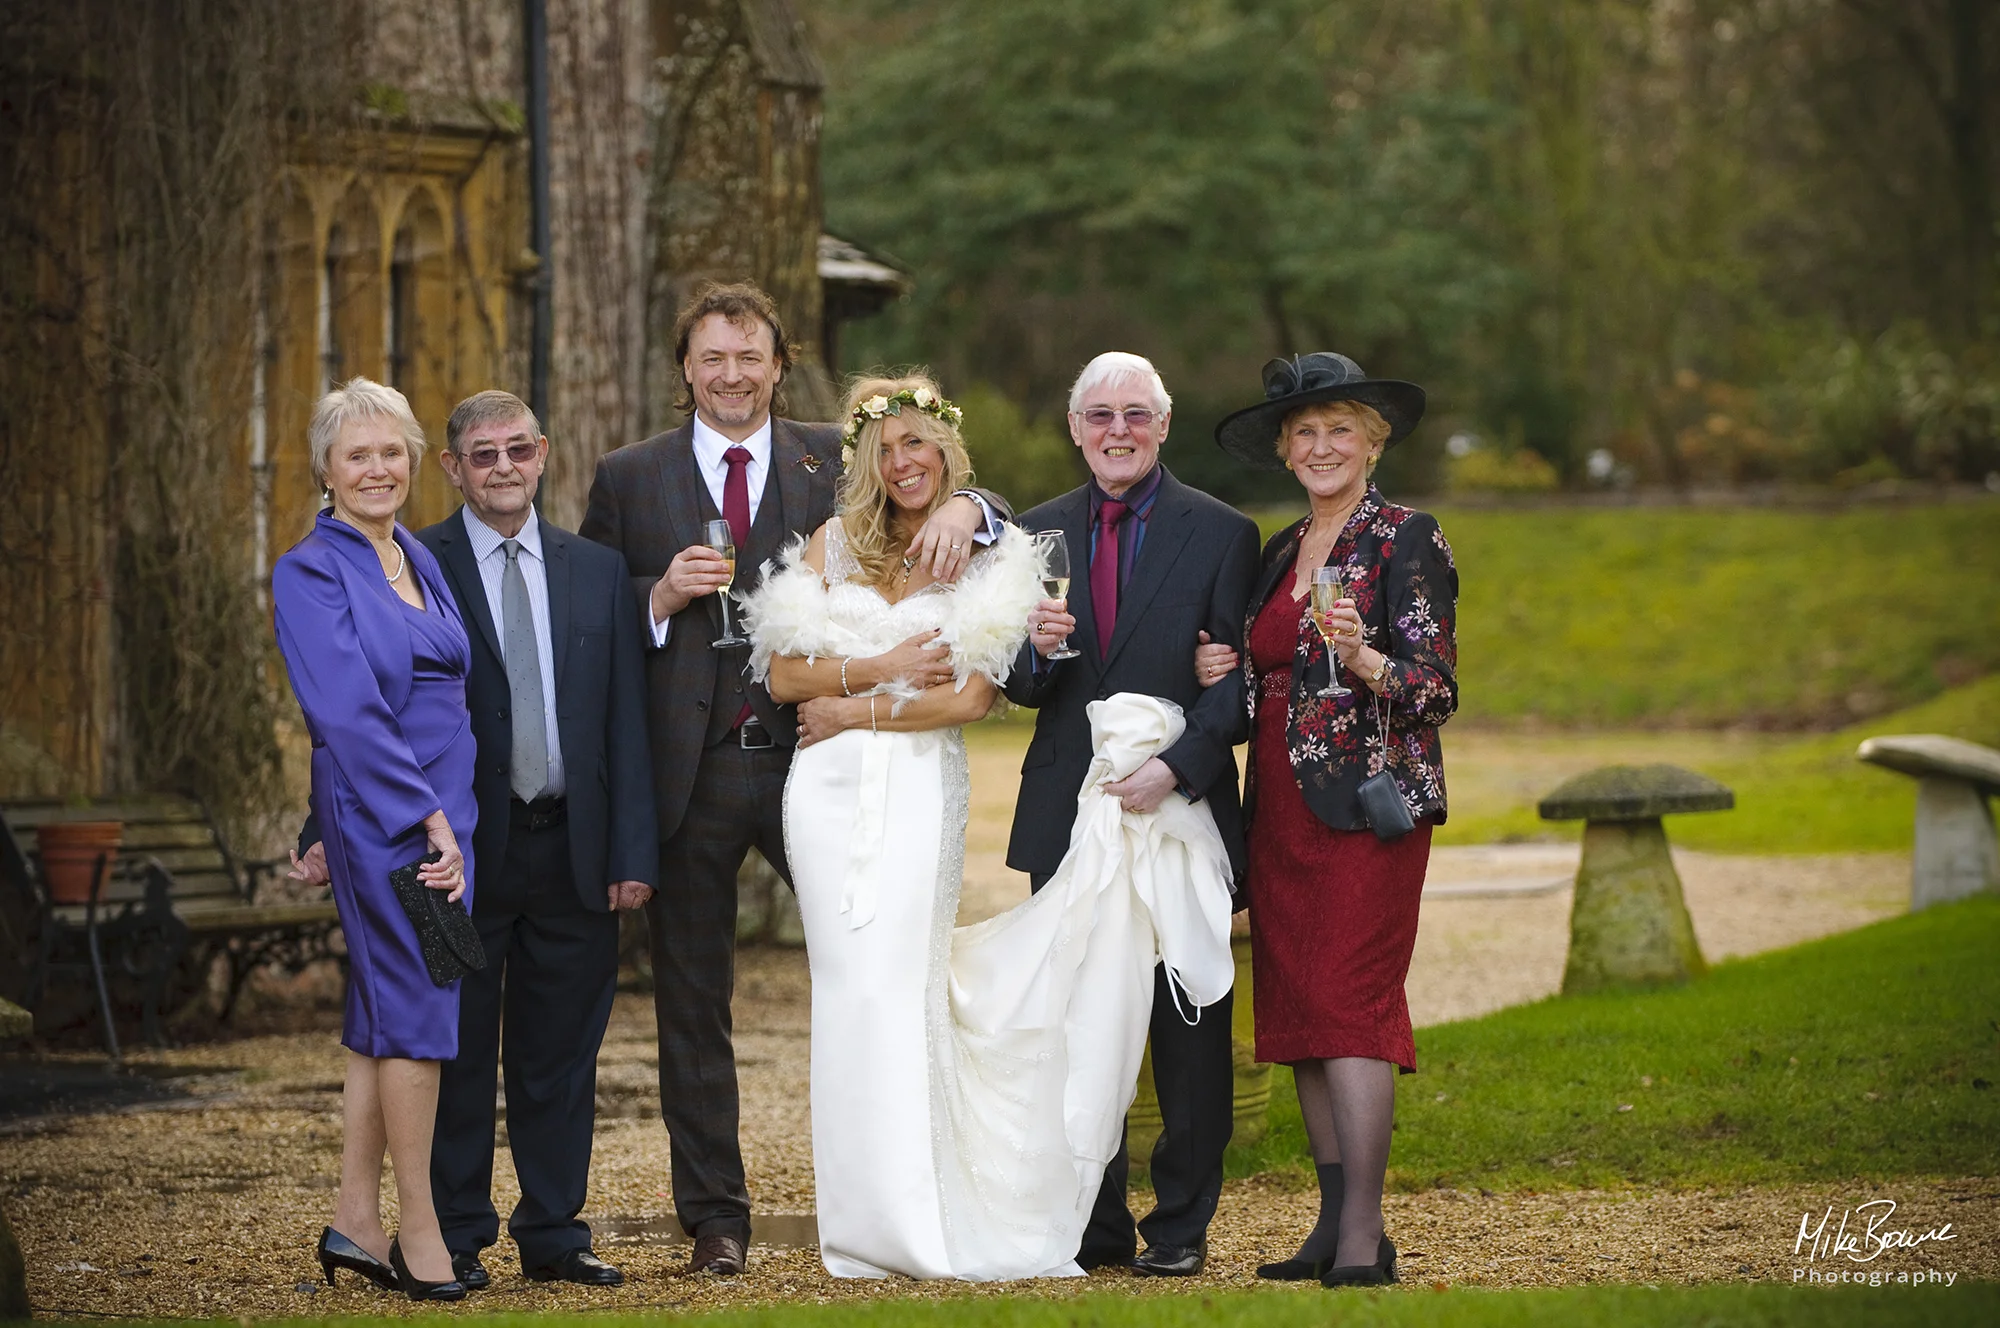 Man and woman dressed for a wedding pose with their parents in a winter garden